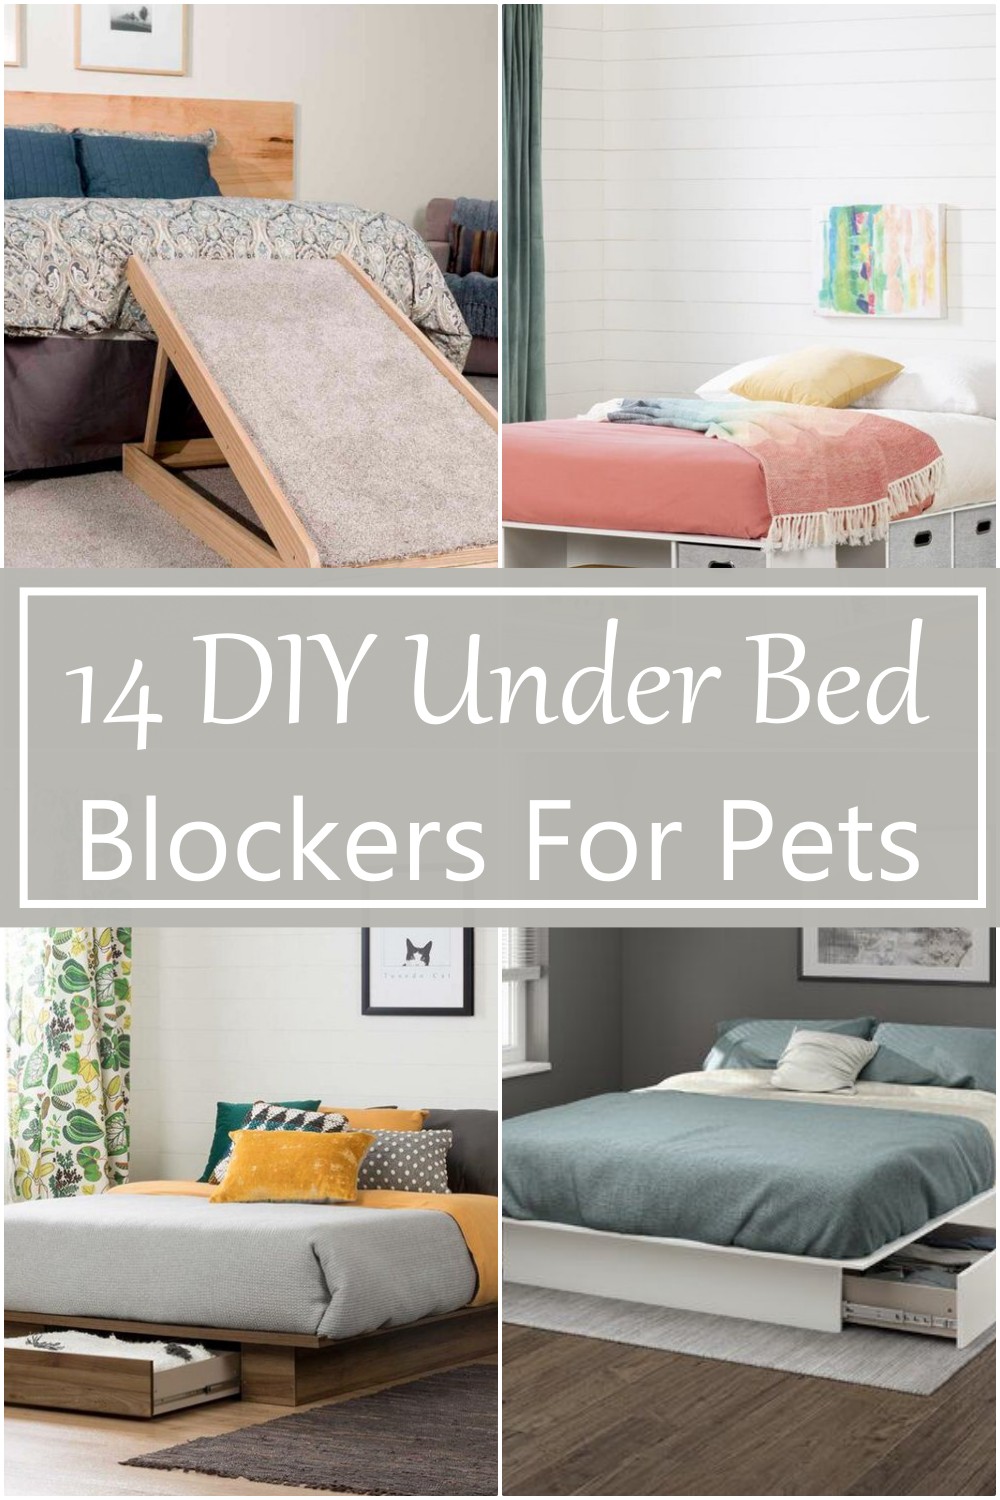 DIY Under Bed Blockers For Pets